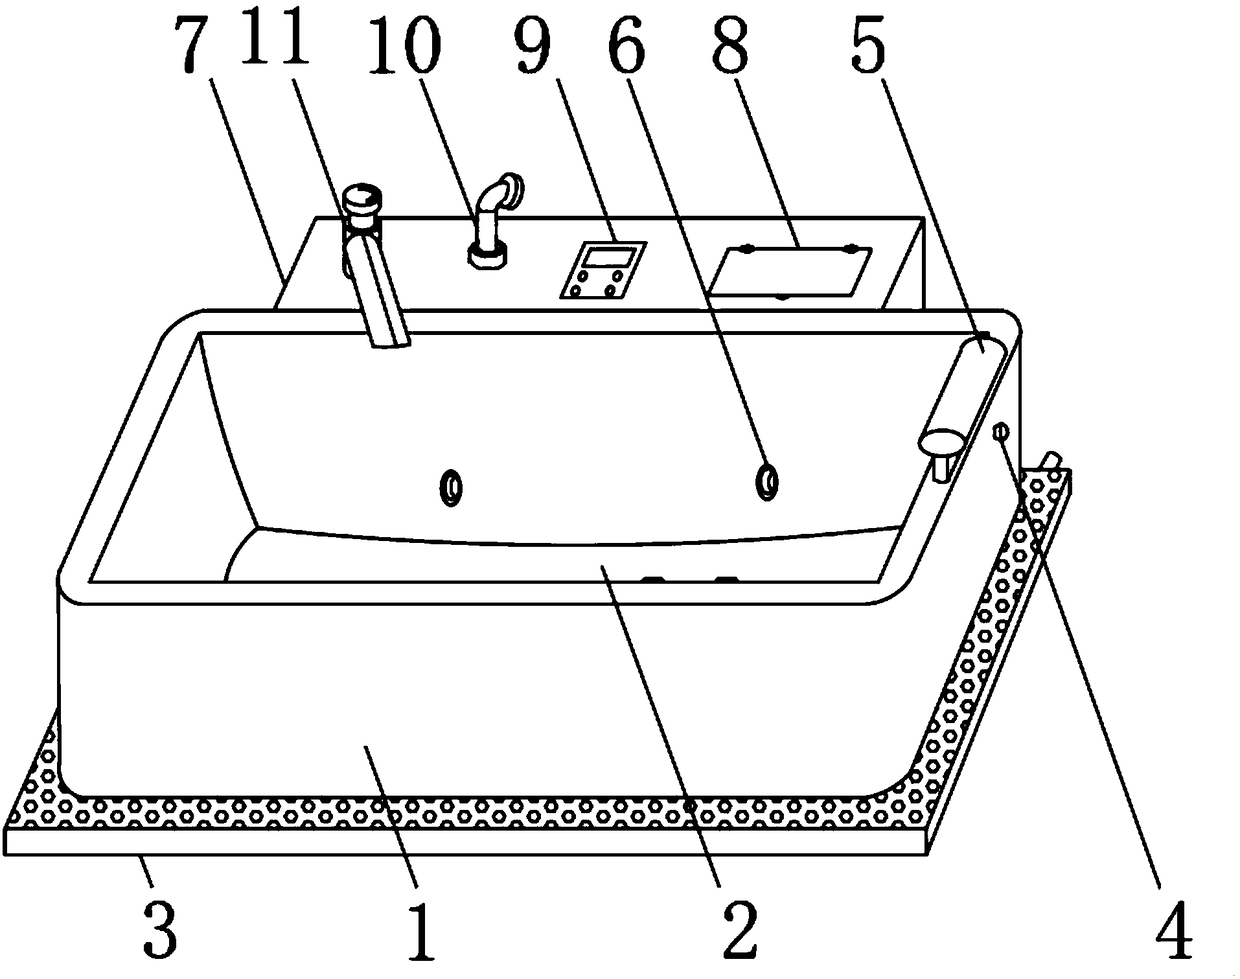 Bathtub capable of conducting massaging through water flow